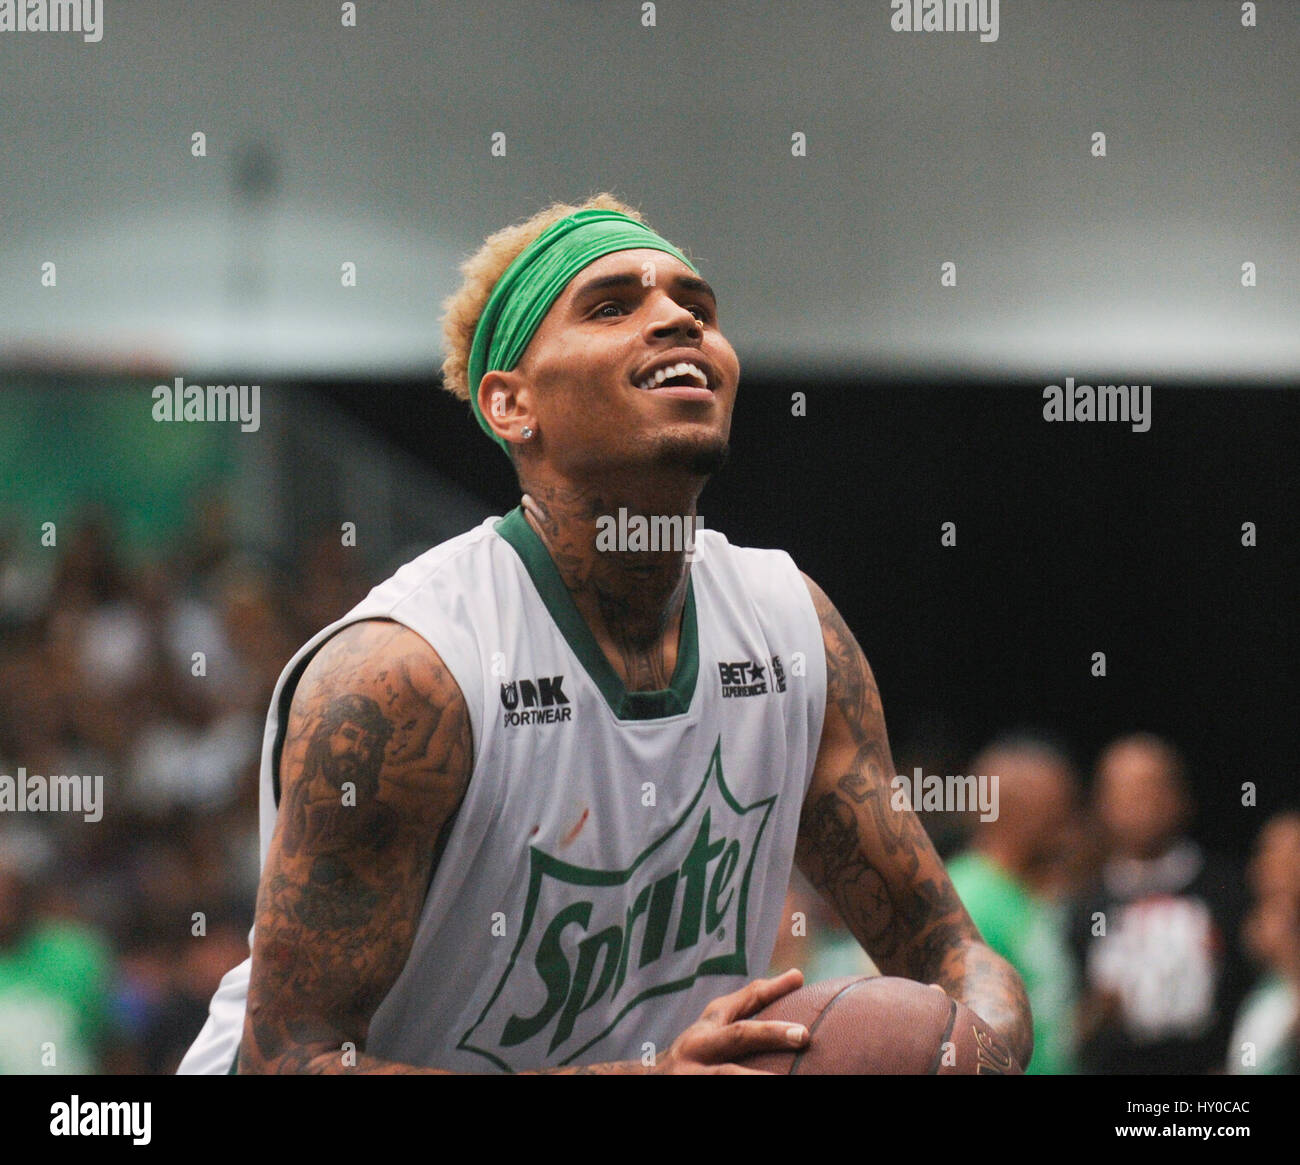 Chris Brown Attends The Bet Experience Sprite Celebrity Basketball Game At The Los Angeles Convention Center On June 27th 15 In Los Angeles California Stock Photo Alamy